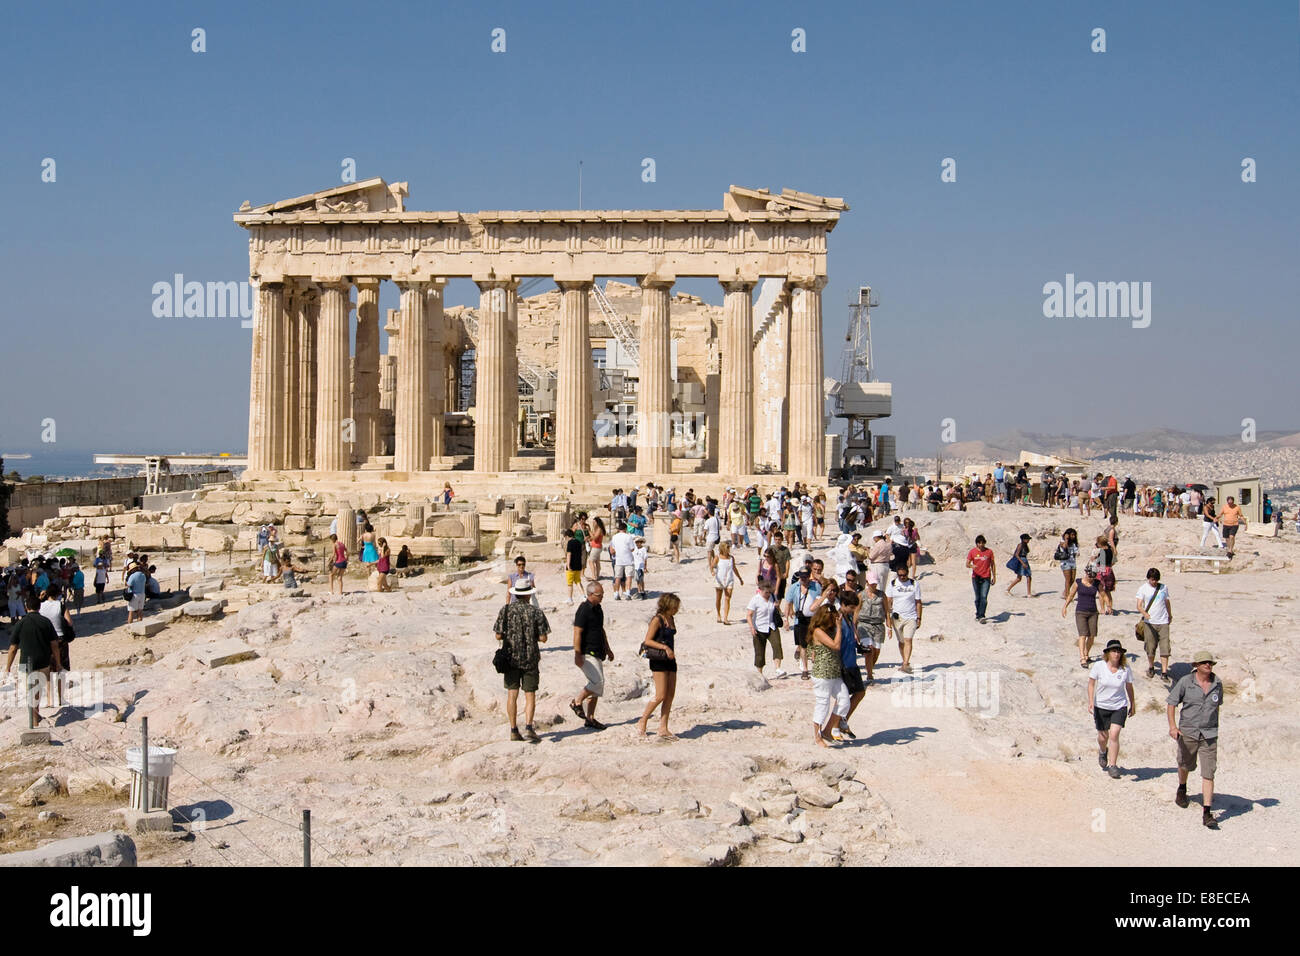 Crowds visiting the archaeological site of the Acropolis in Athens, Greece. View of the Parthenon in the background. Stock Photo